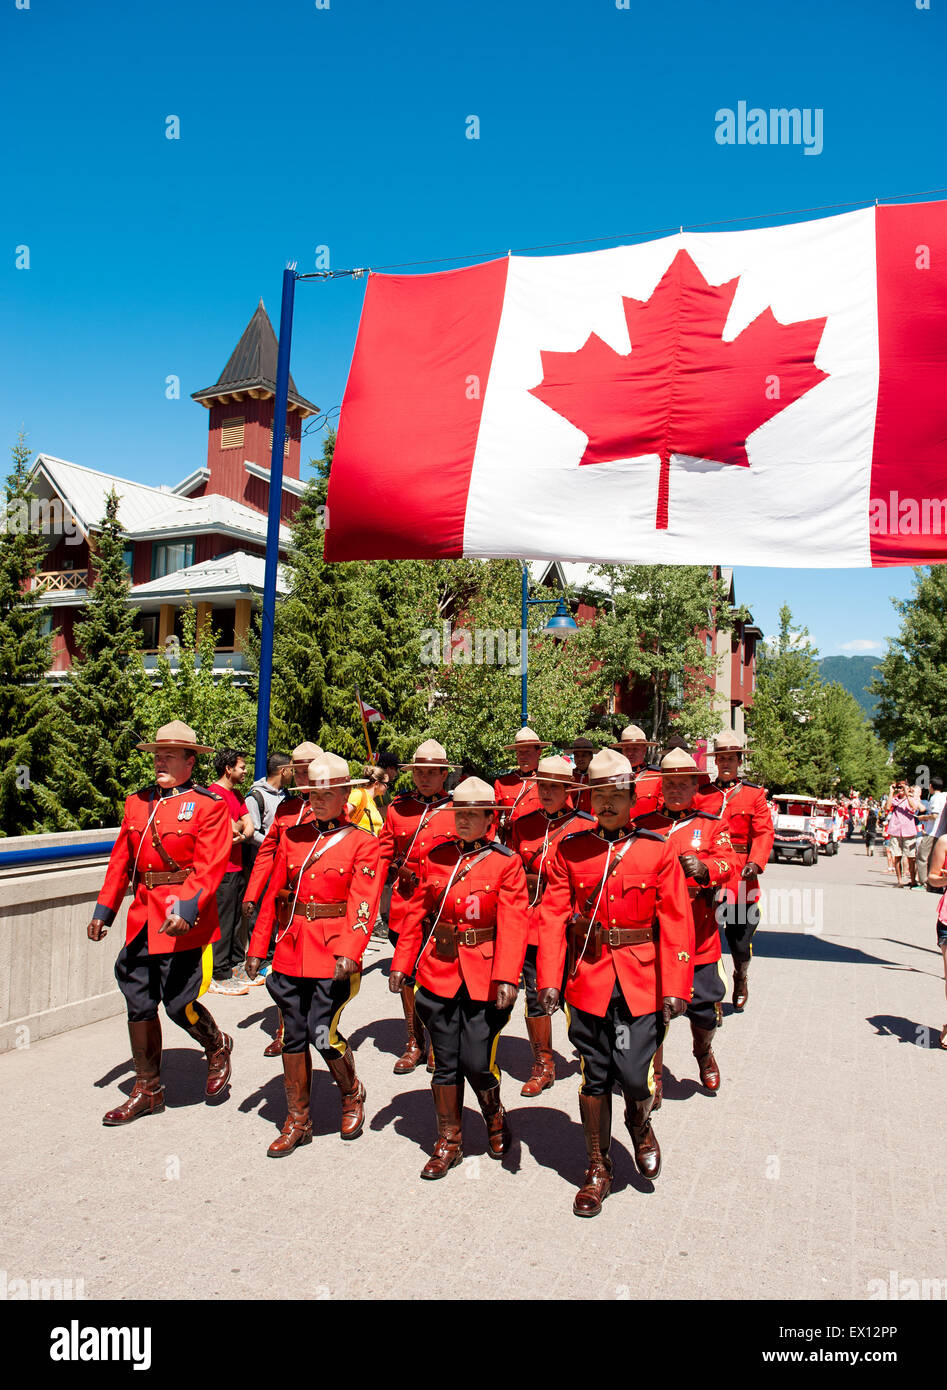 Royal Canadian Mounted Police officers parade under a Canadian flag in ceremonial red serge uniforms for Canada Day.  Canadian P Stock Photo